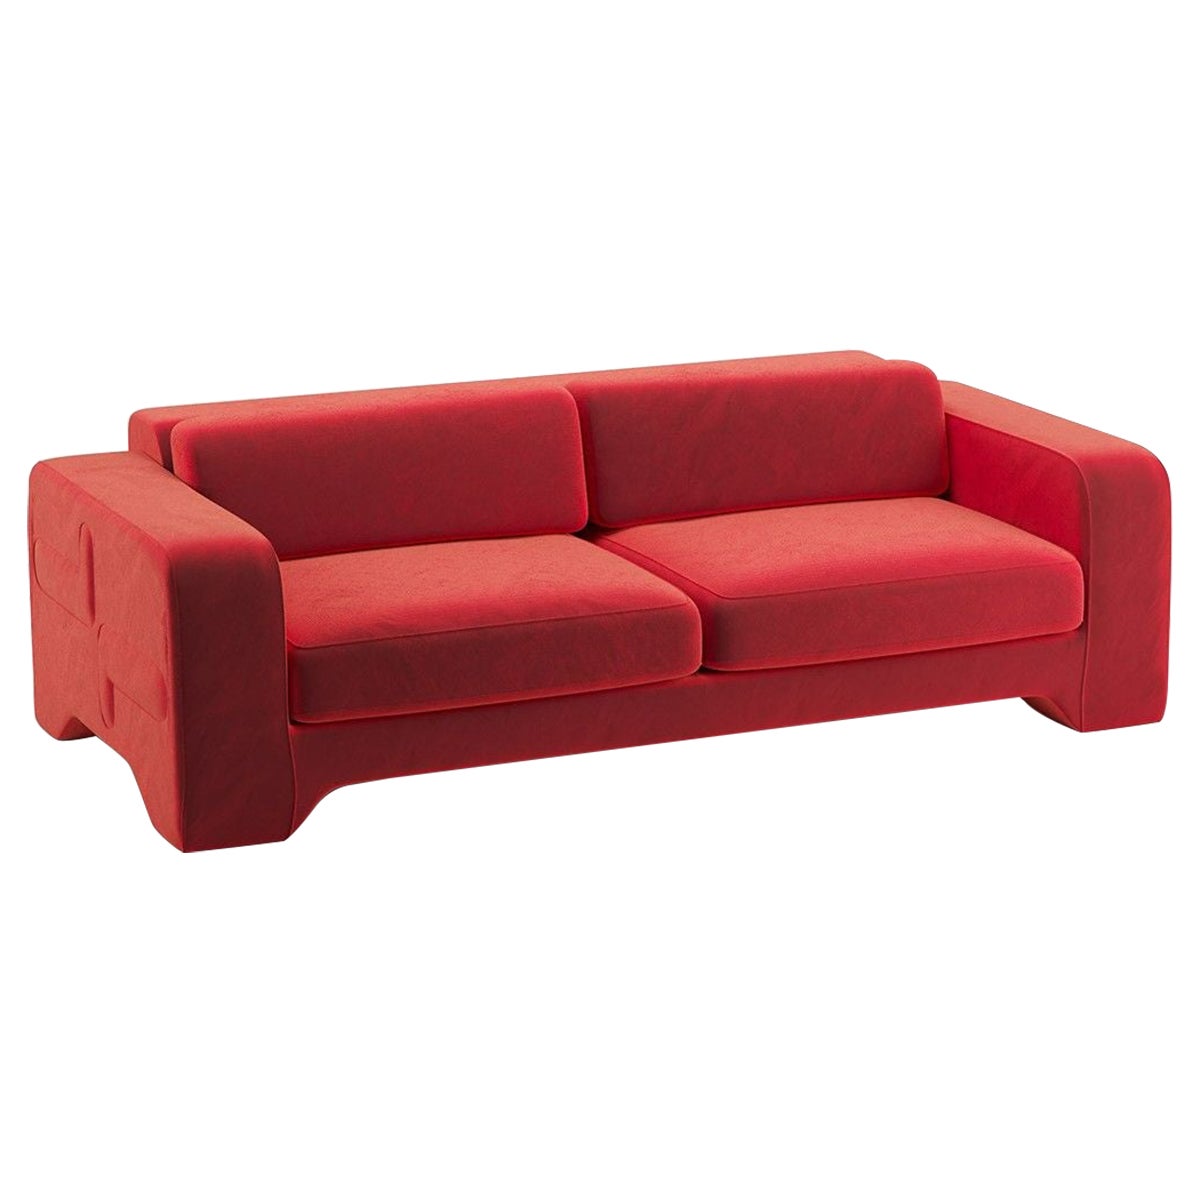 Popus Editions Giovanna 3 Seater Sofa in Orange-Red Como Velvet Upholstery For Sale